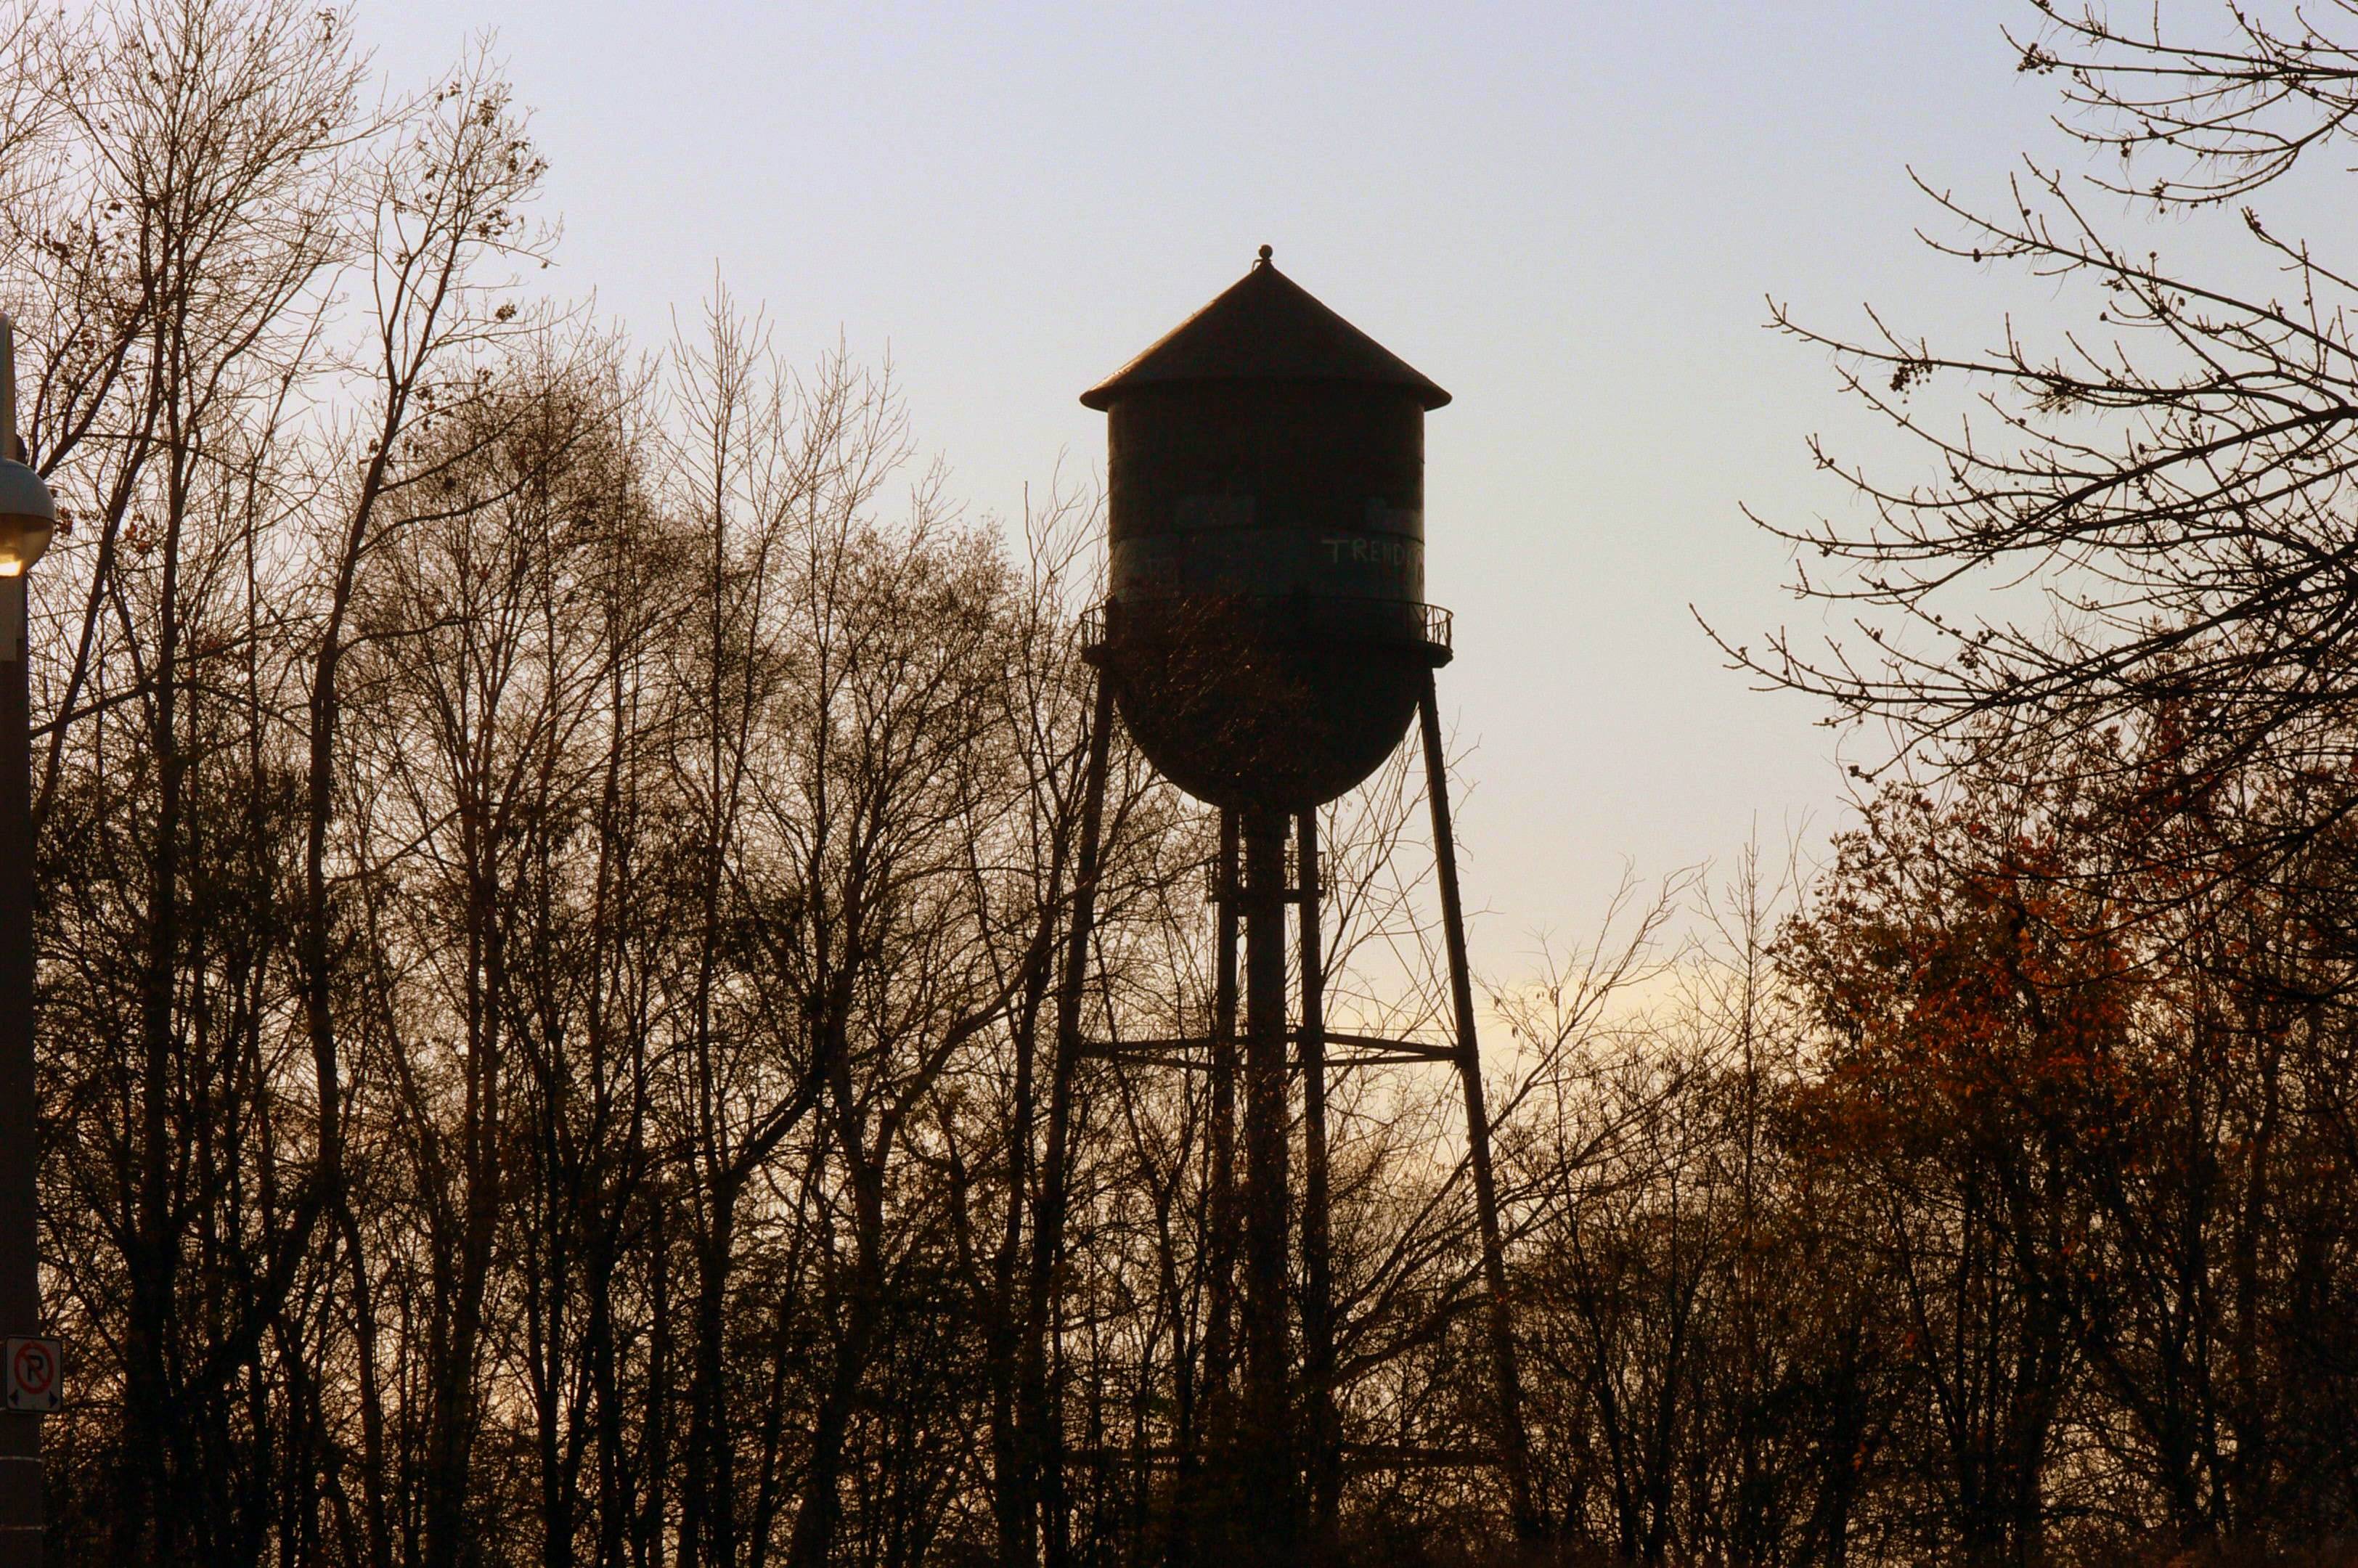 Old Water Tower.....